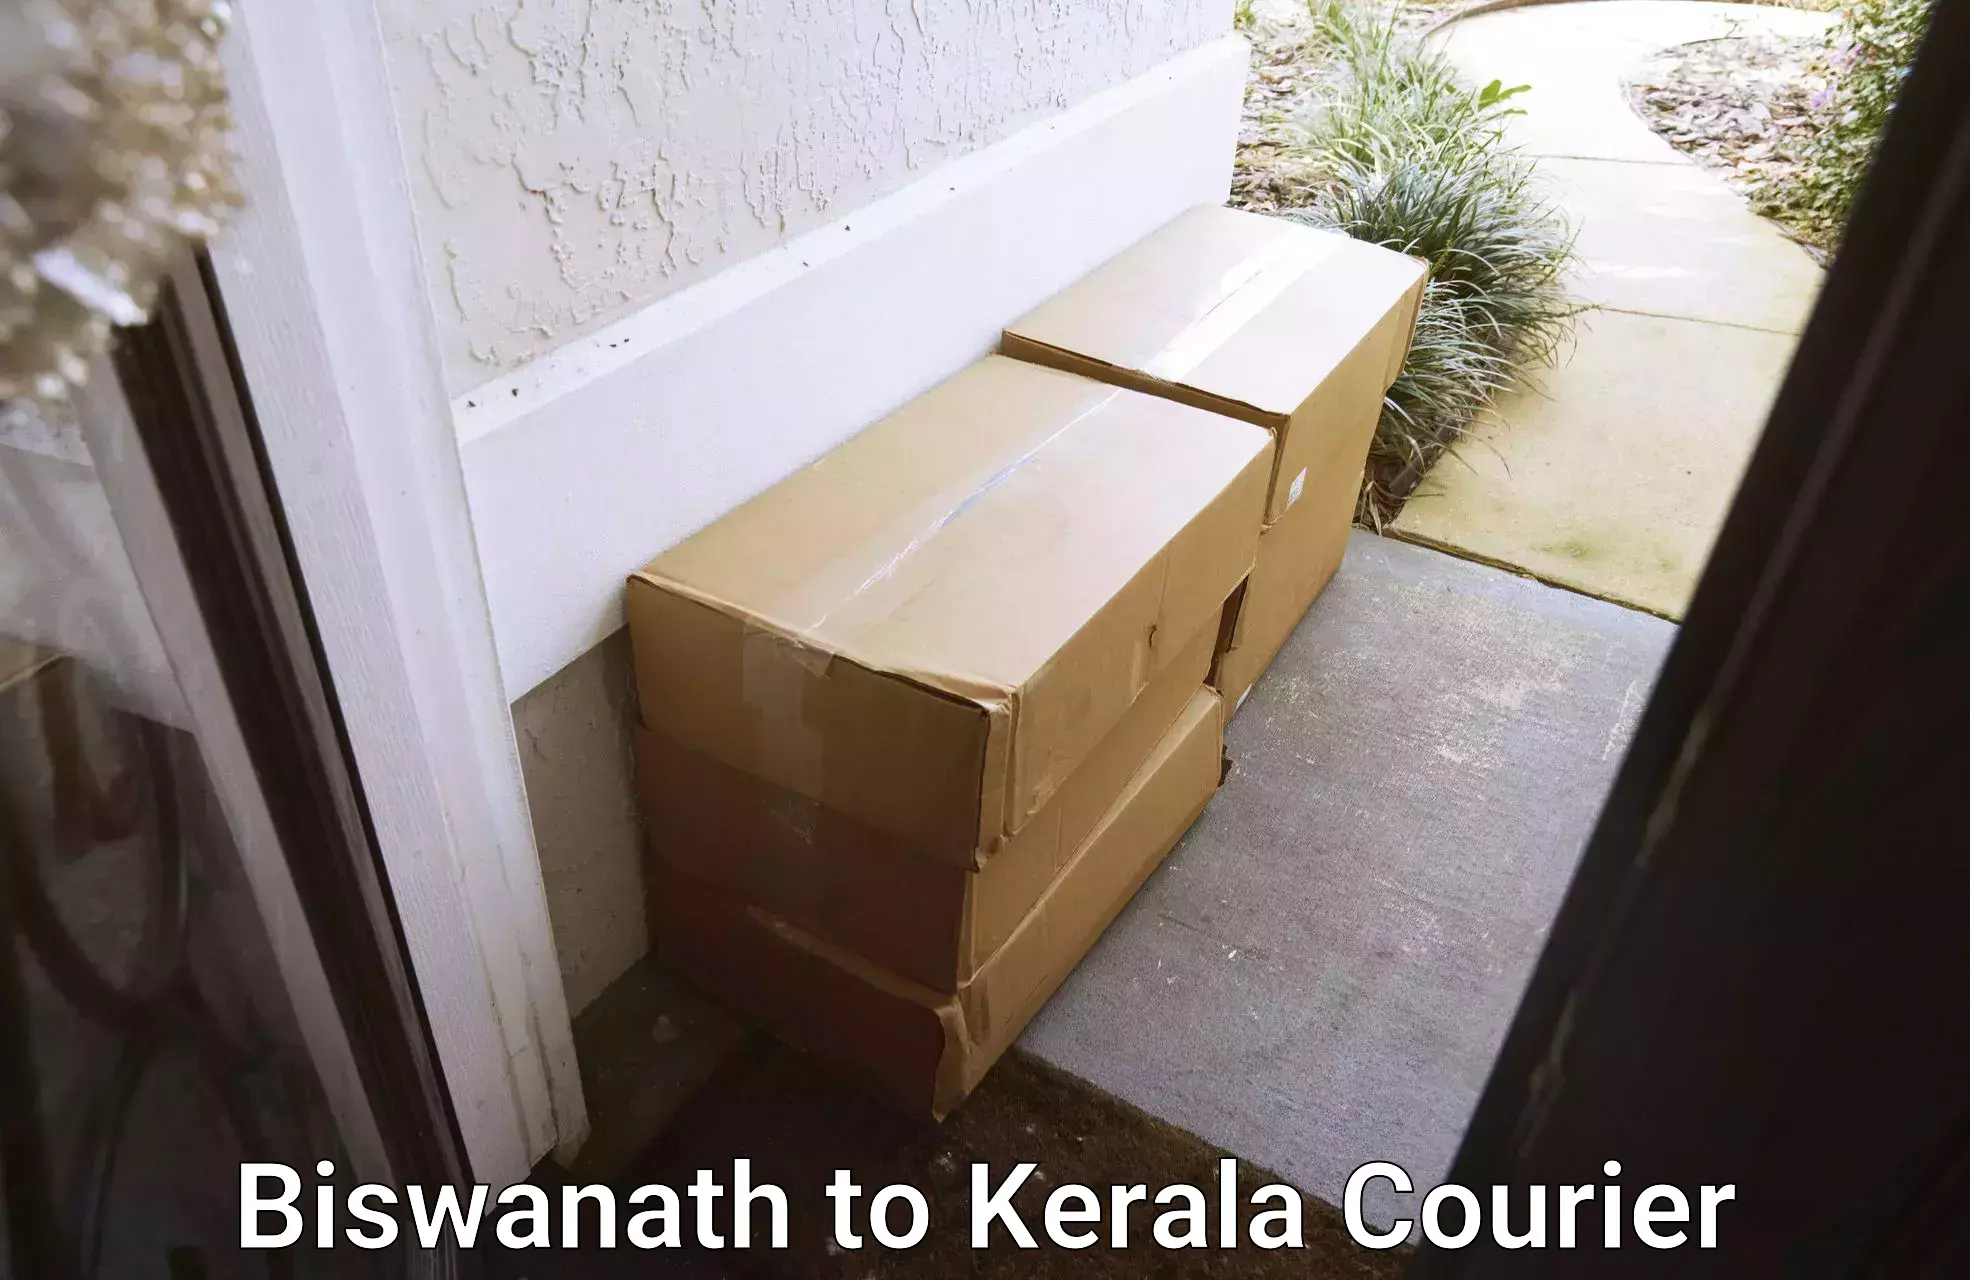 Full-service courier options in Biswanath to Ponekkara